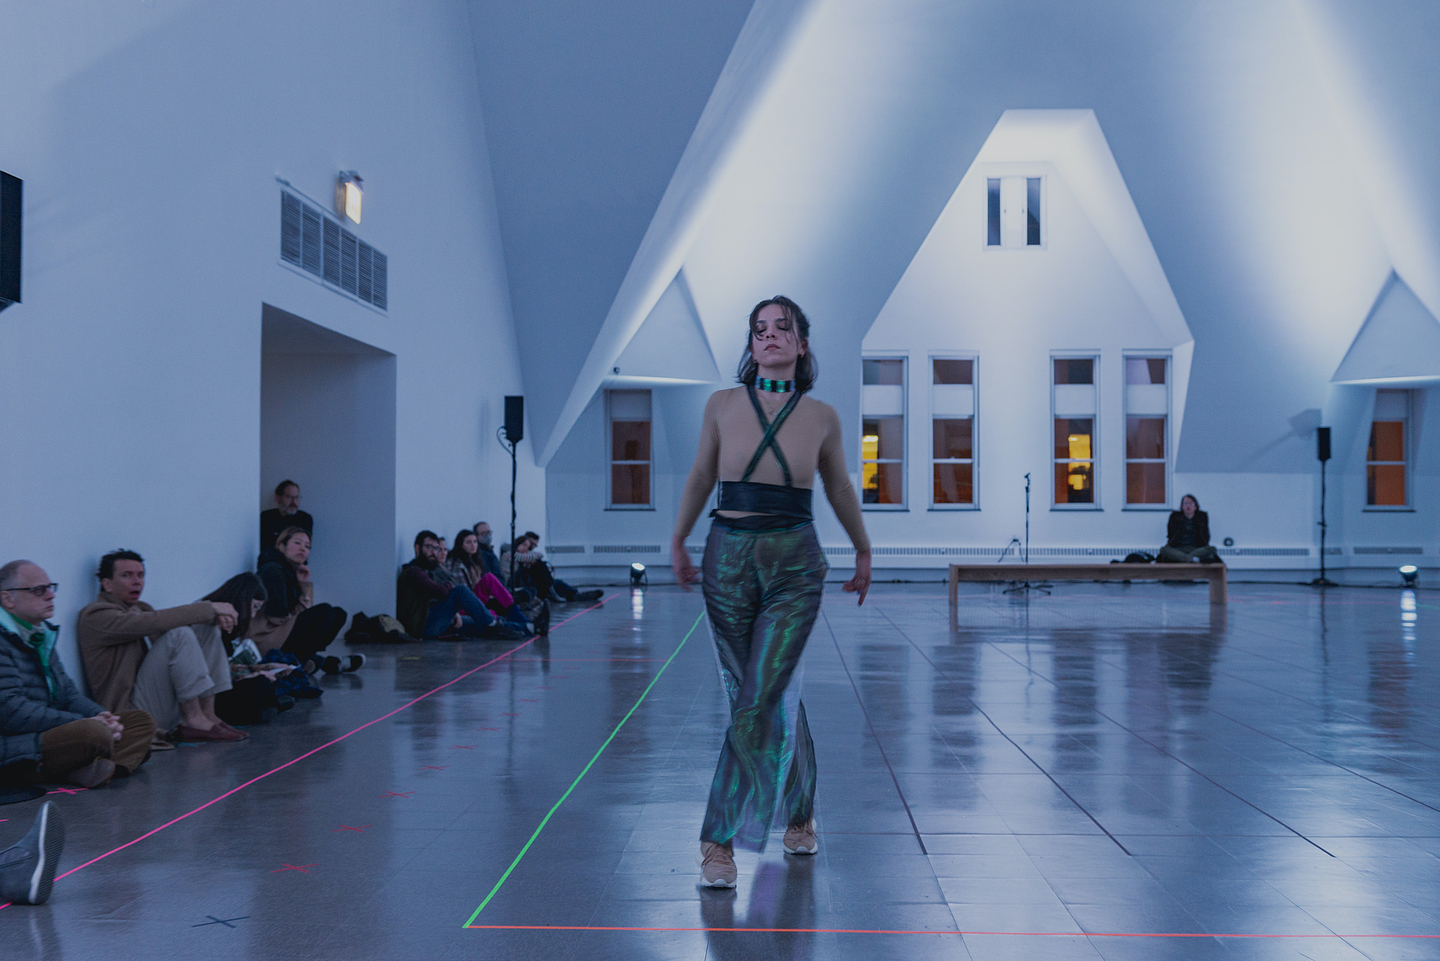 Nour Mobarak walks across a gallery floor with her eyes closed and arms outstretched behind her. She wears a glowing choker, a sheer, long-sleeved beige crop top, a black X-shaped brace across her chest, iridescent pants, and sneakers. Lines of neon green and pink tape demarcate the performance space, and audience members sit on the periphery against the gallery wall. The back wall of the space is architecturally distinct, as it features a row of windows below dramatic angular recesses. 